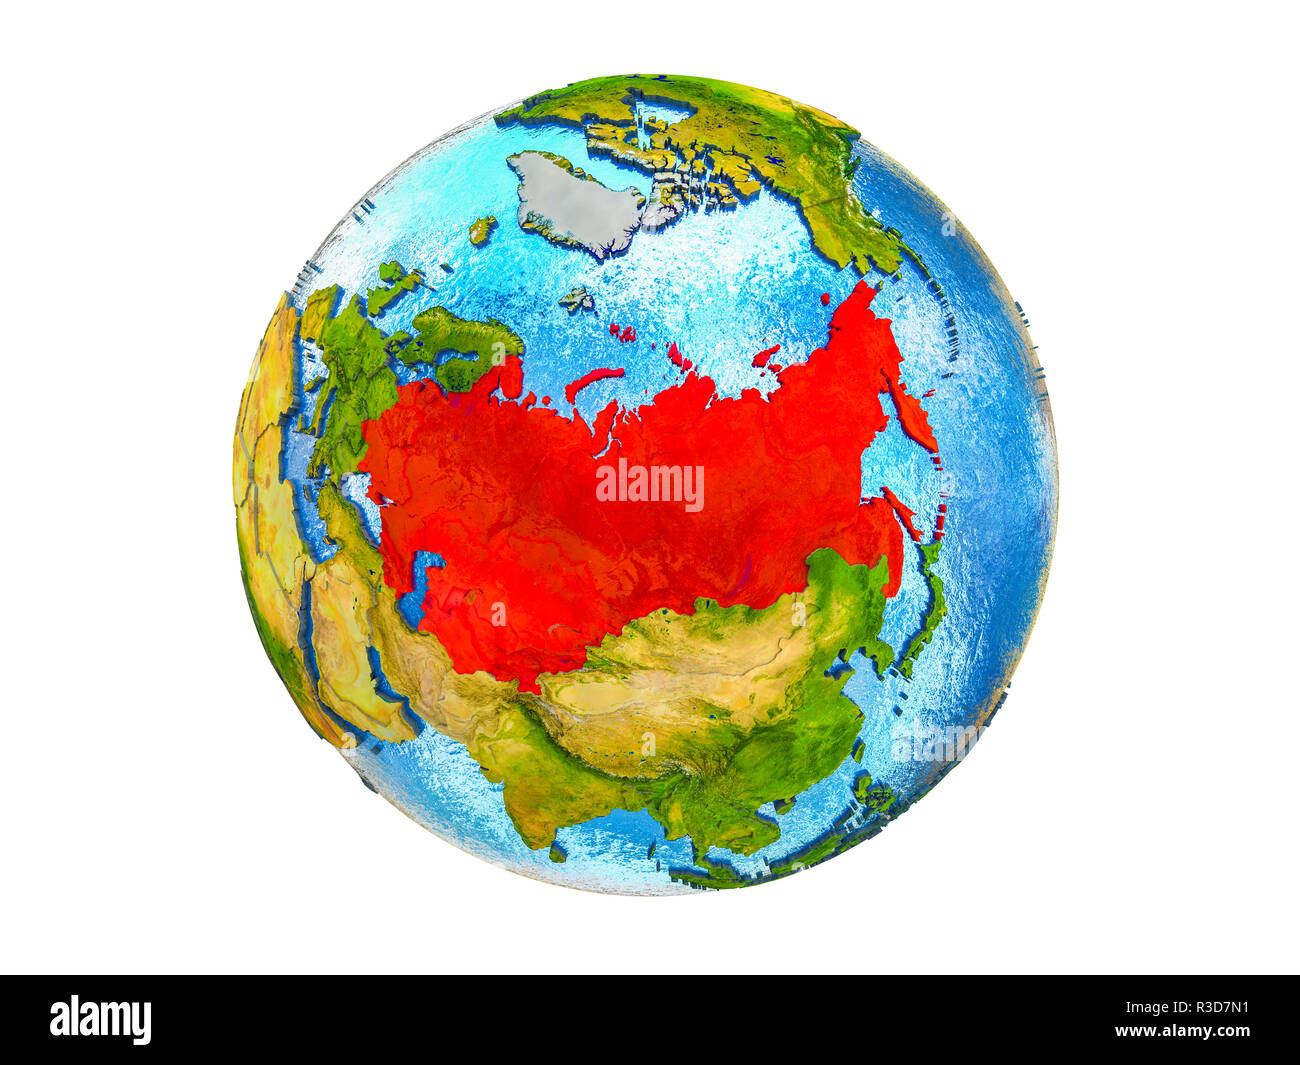 Former Soviet Union on 3D model of Earth with country borders and water in oceans. 3D illustration isolated on white background. Stock Photo